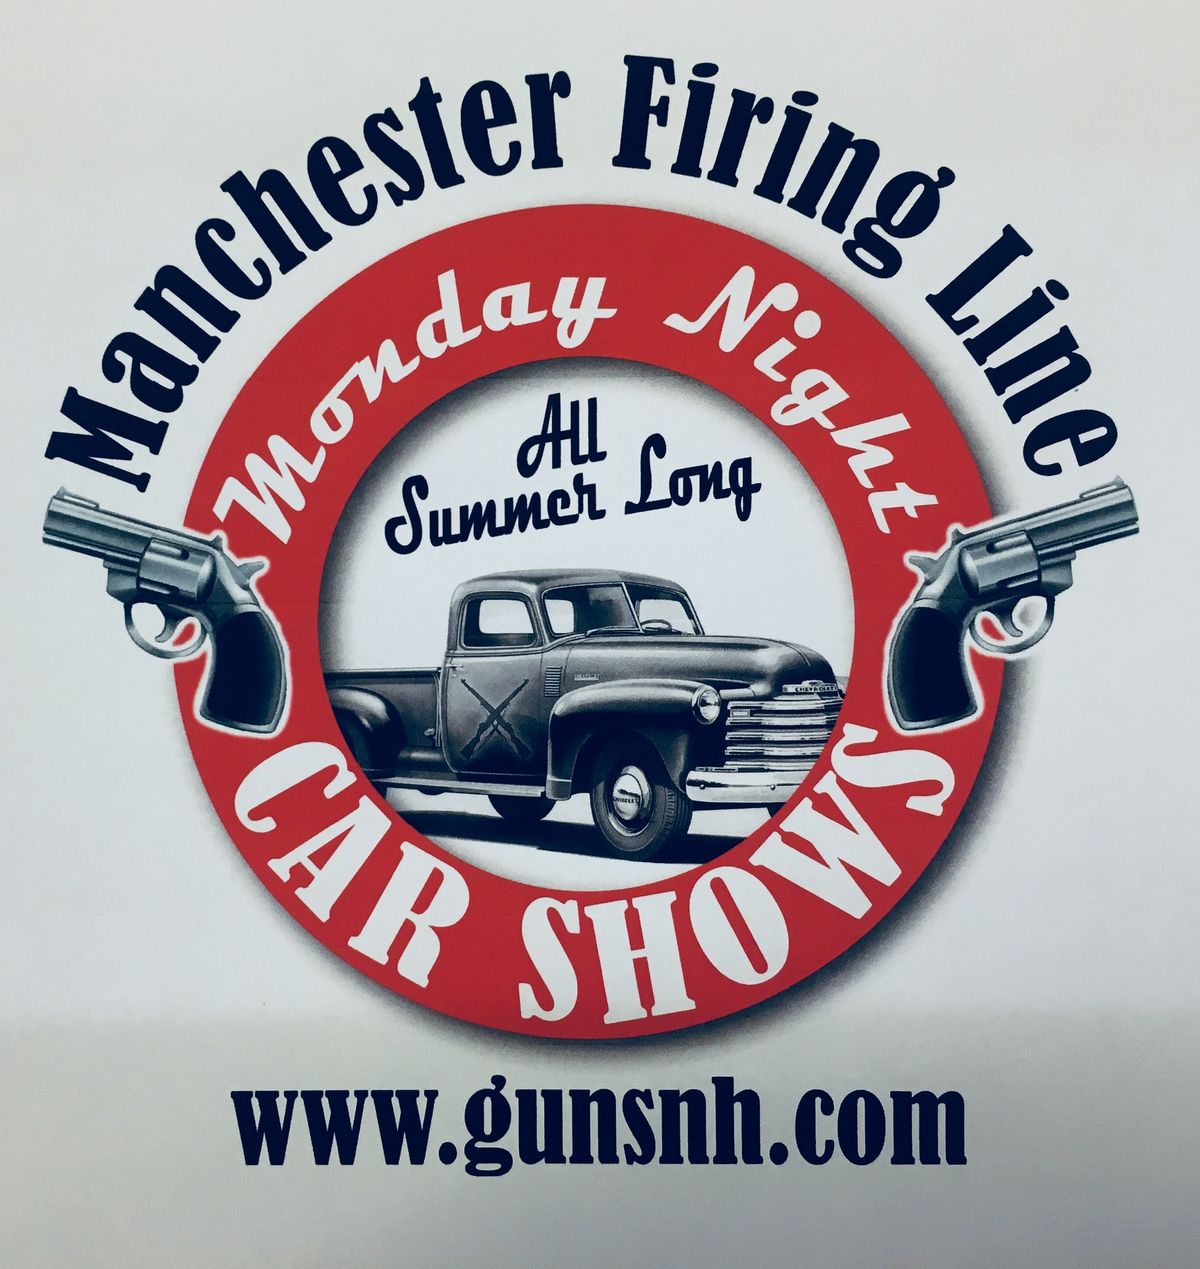 Monday Cruise Nights at Manchester Firing Line